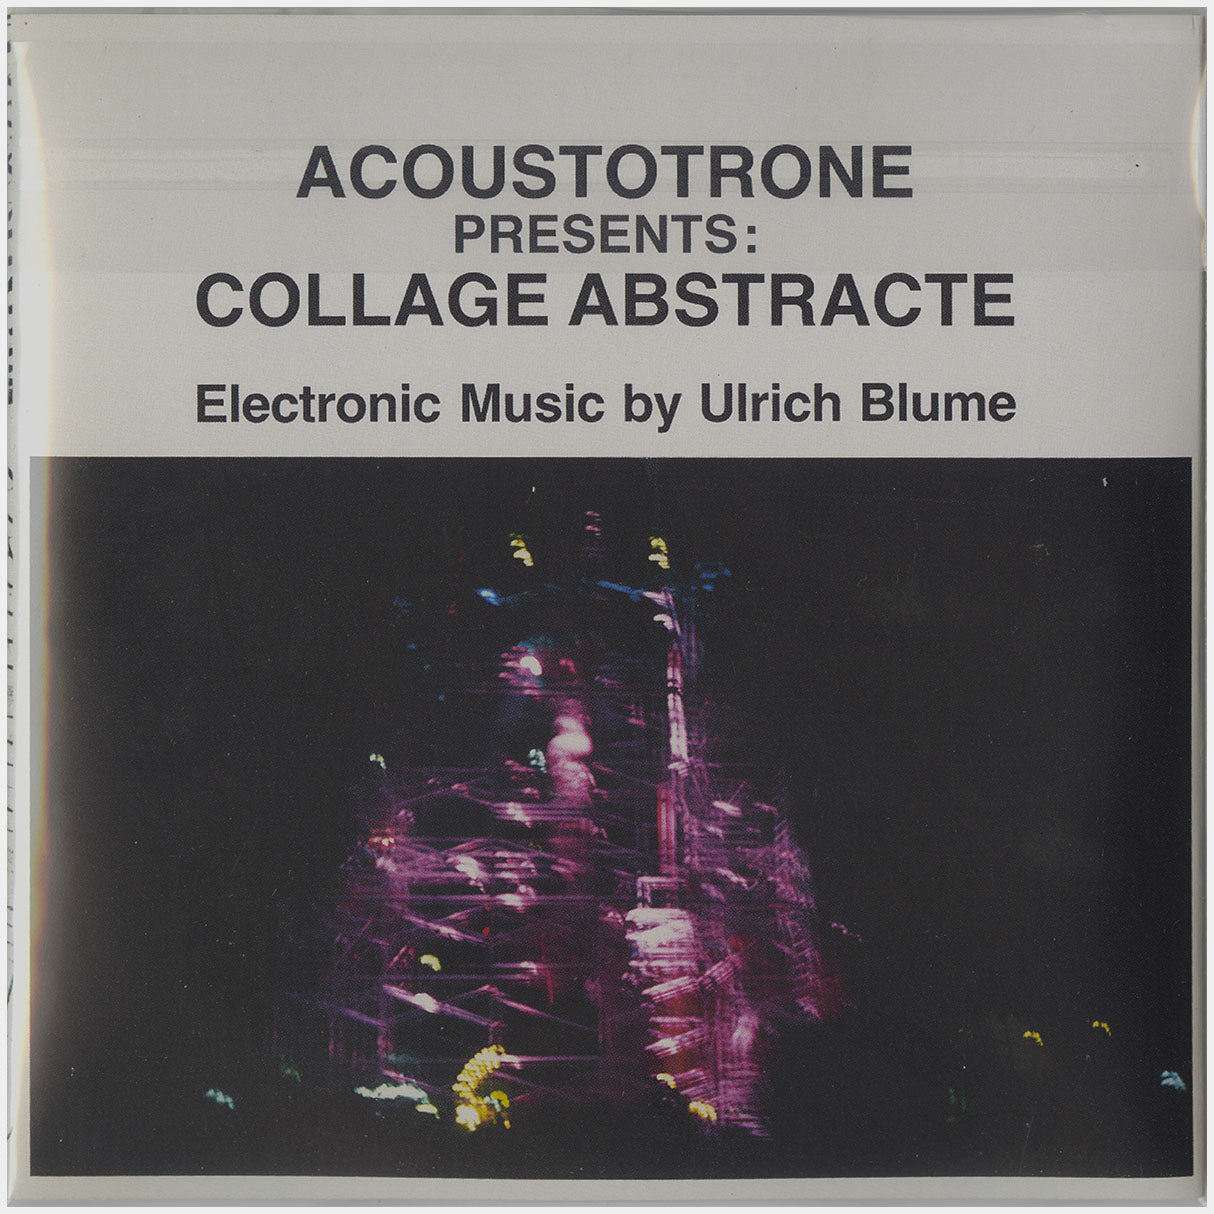 [CP 265 CD] Ulrich Blume; Ground Your Ears, Collage Abstracte